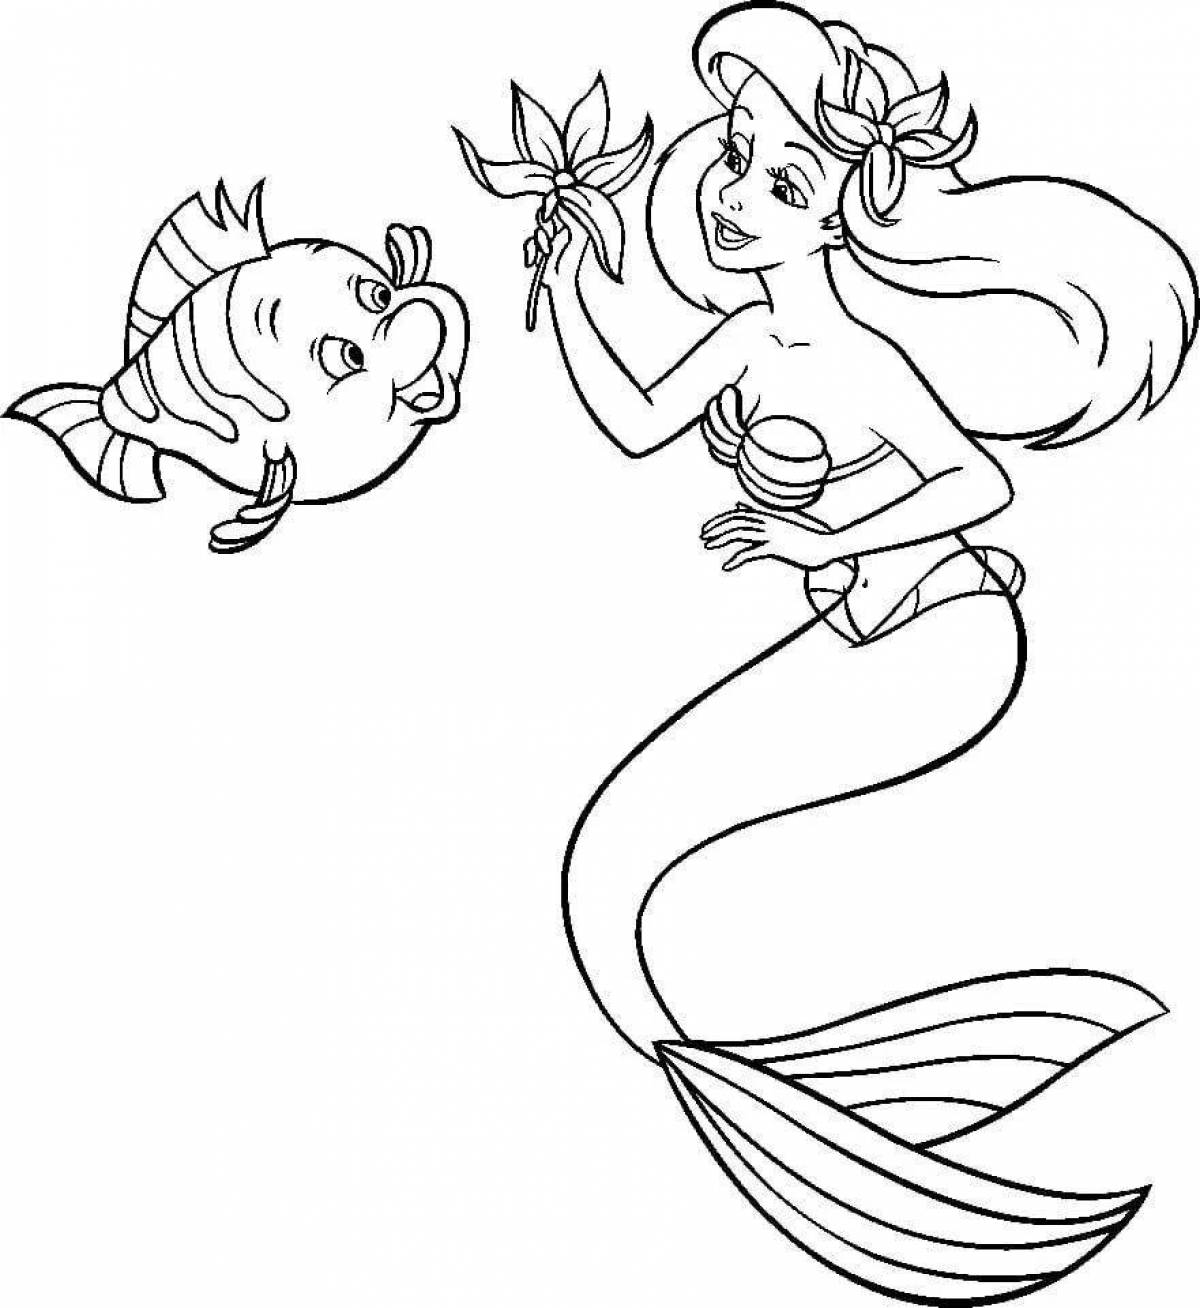 A spectacular coloring picture of a mermaid